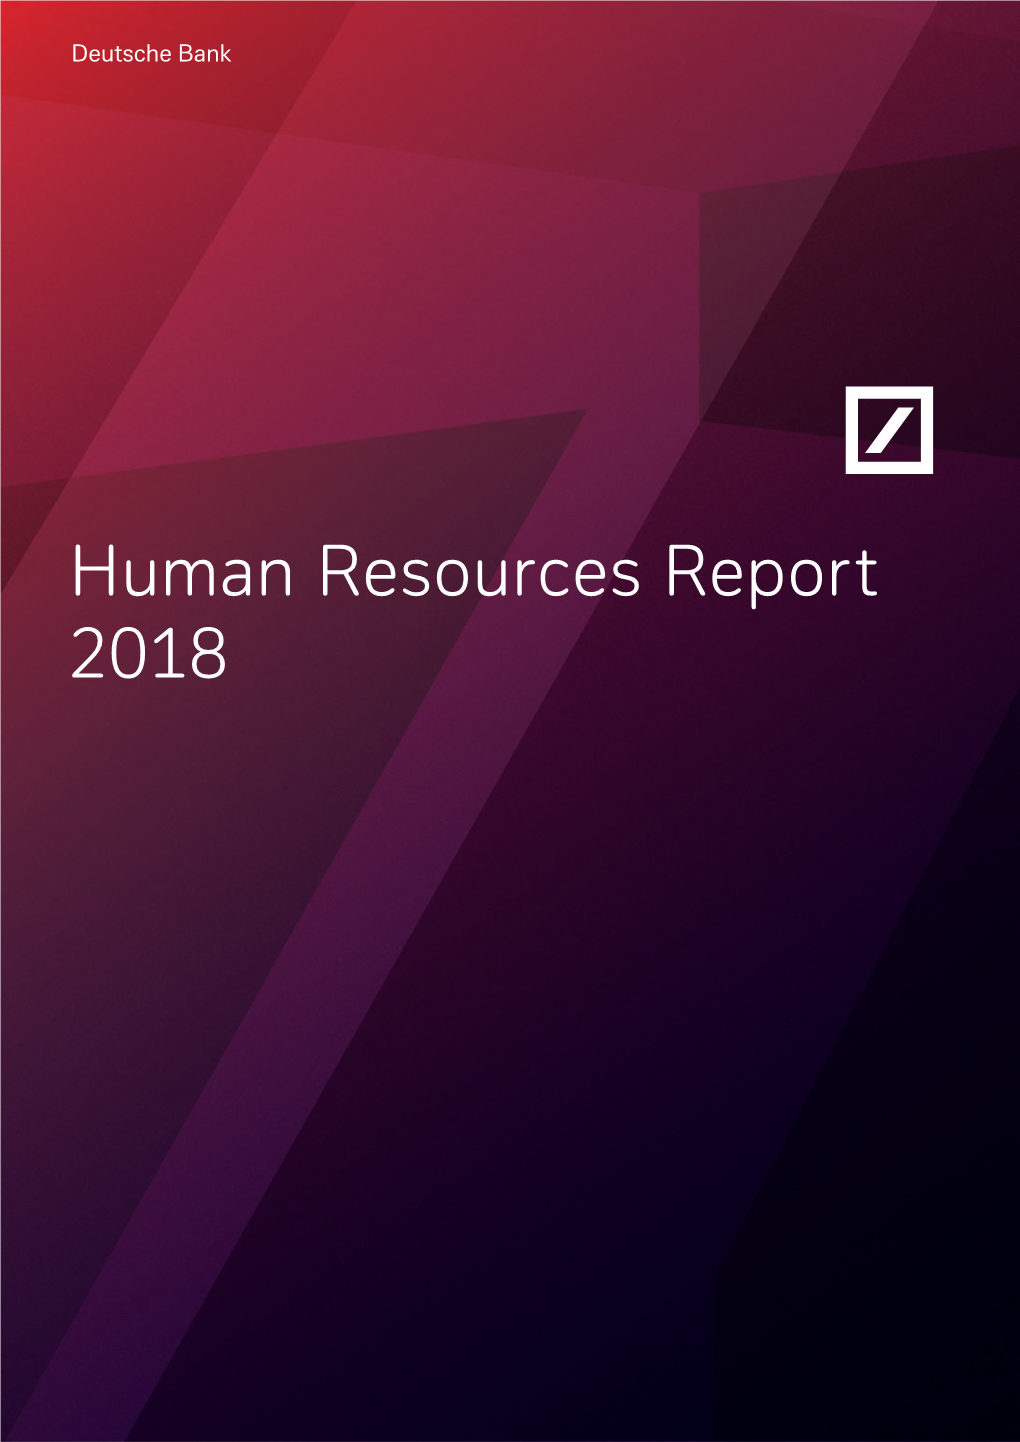 Human Resources Report 2018 Content